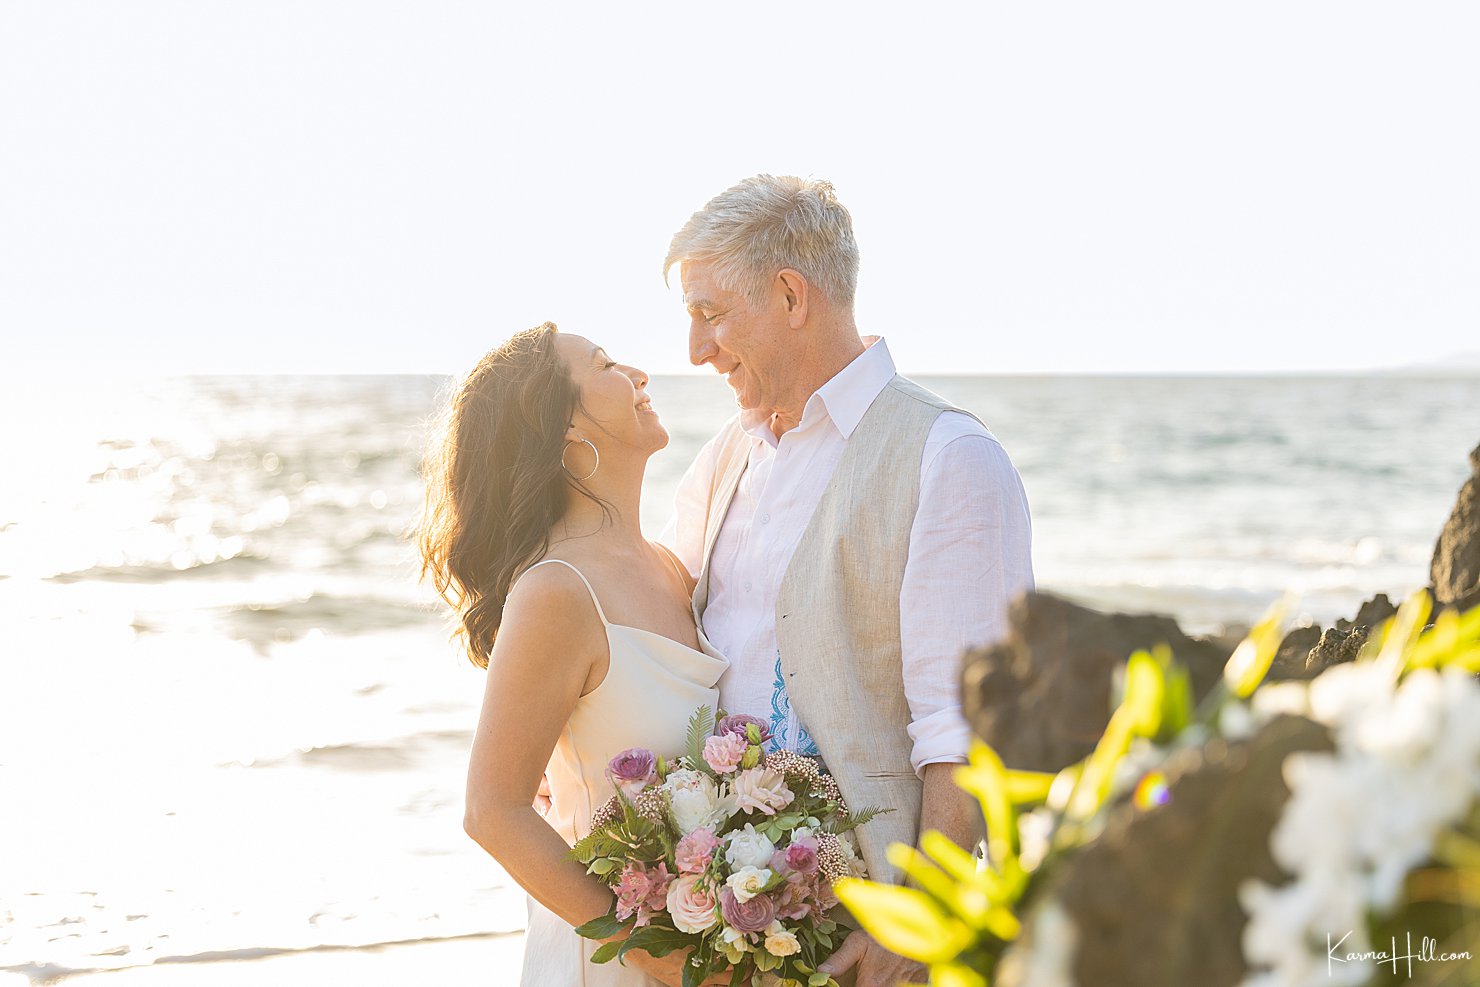 Photo inspiration to get married in Maui